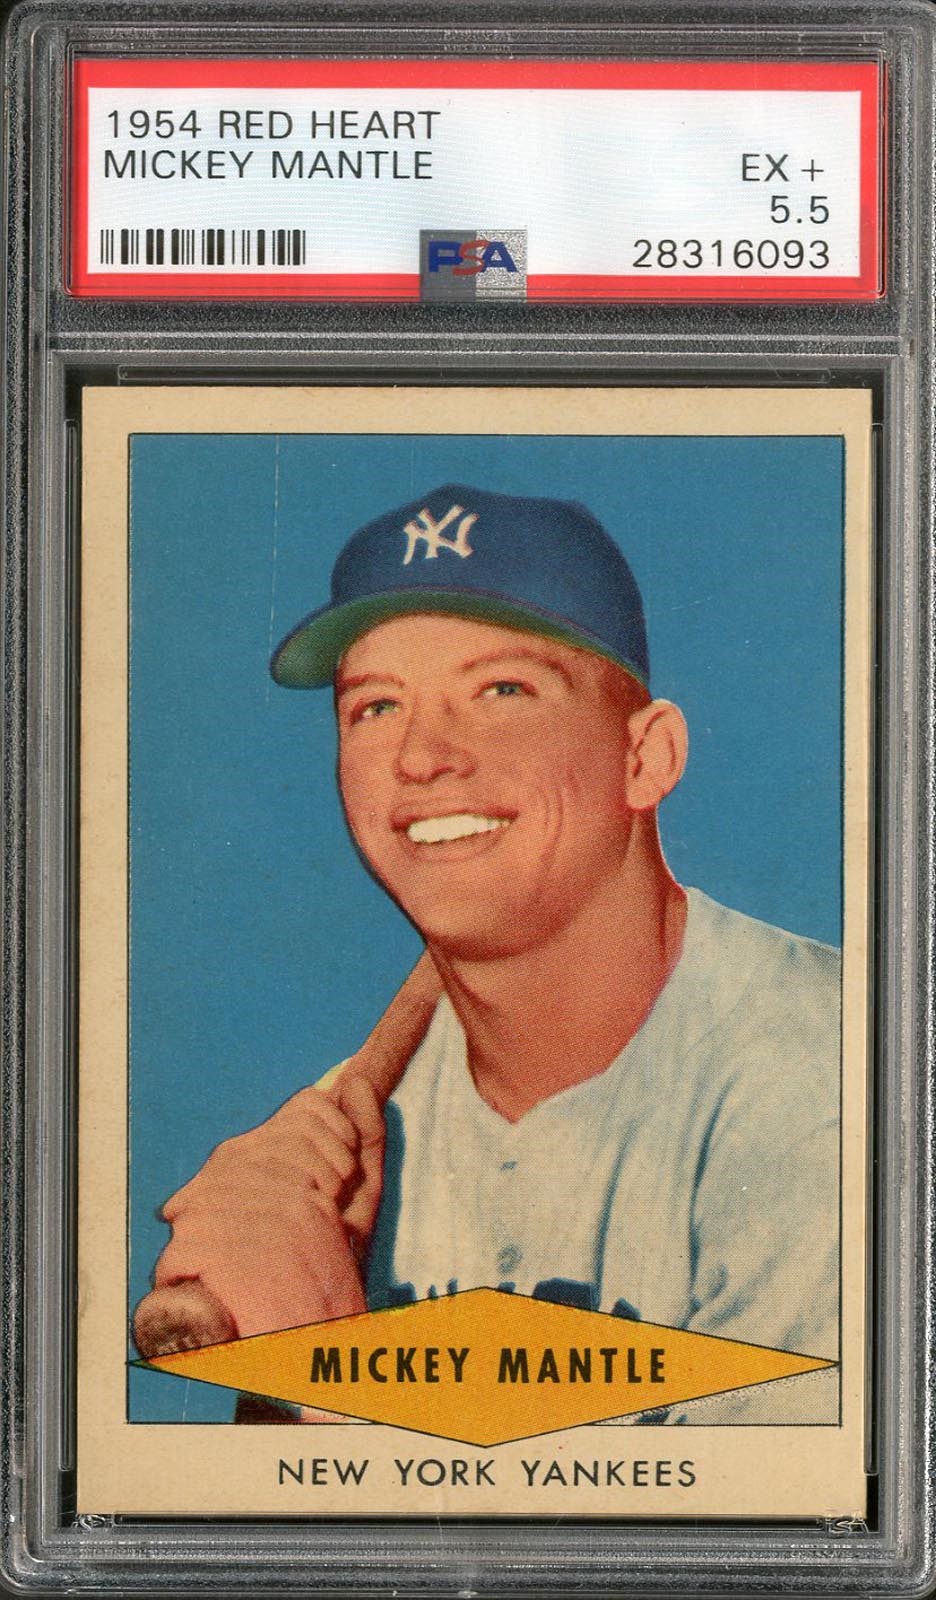 - 1954 Red Heart Mickey Mantle (PSA EX+ 5.5)